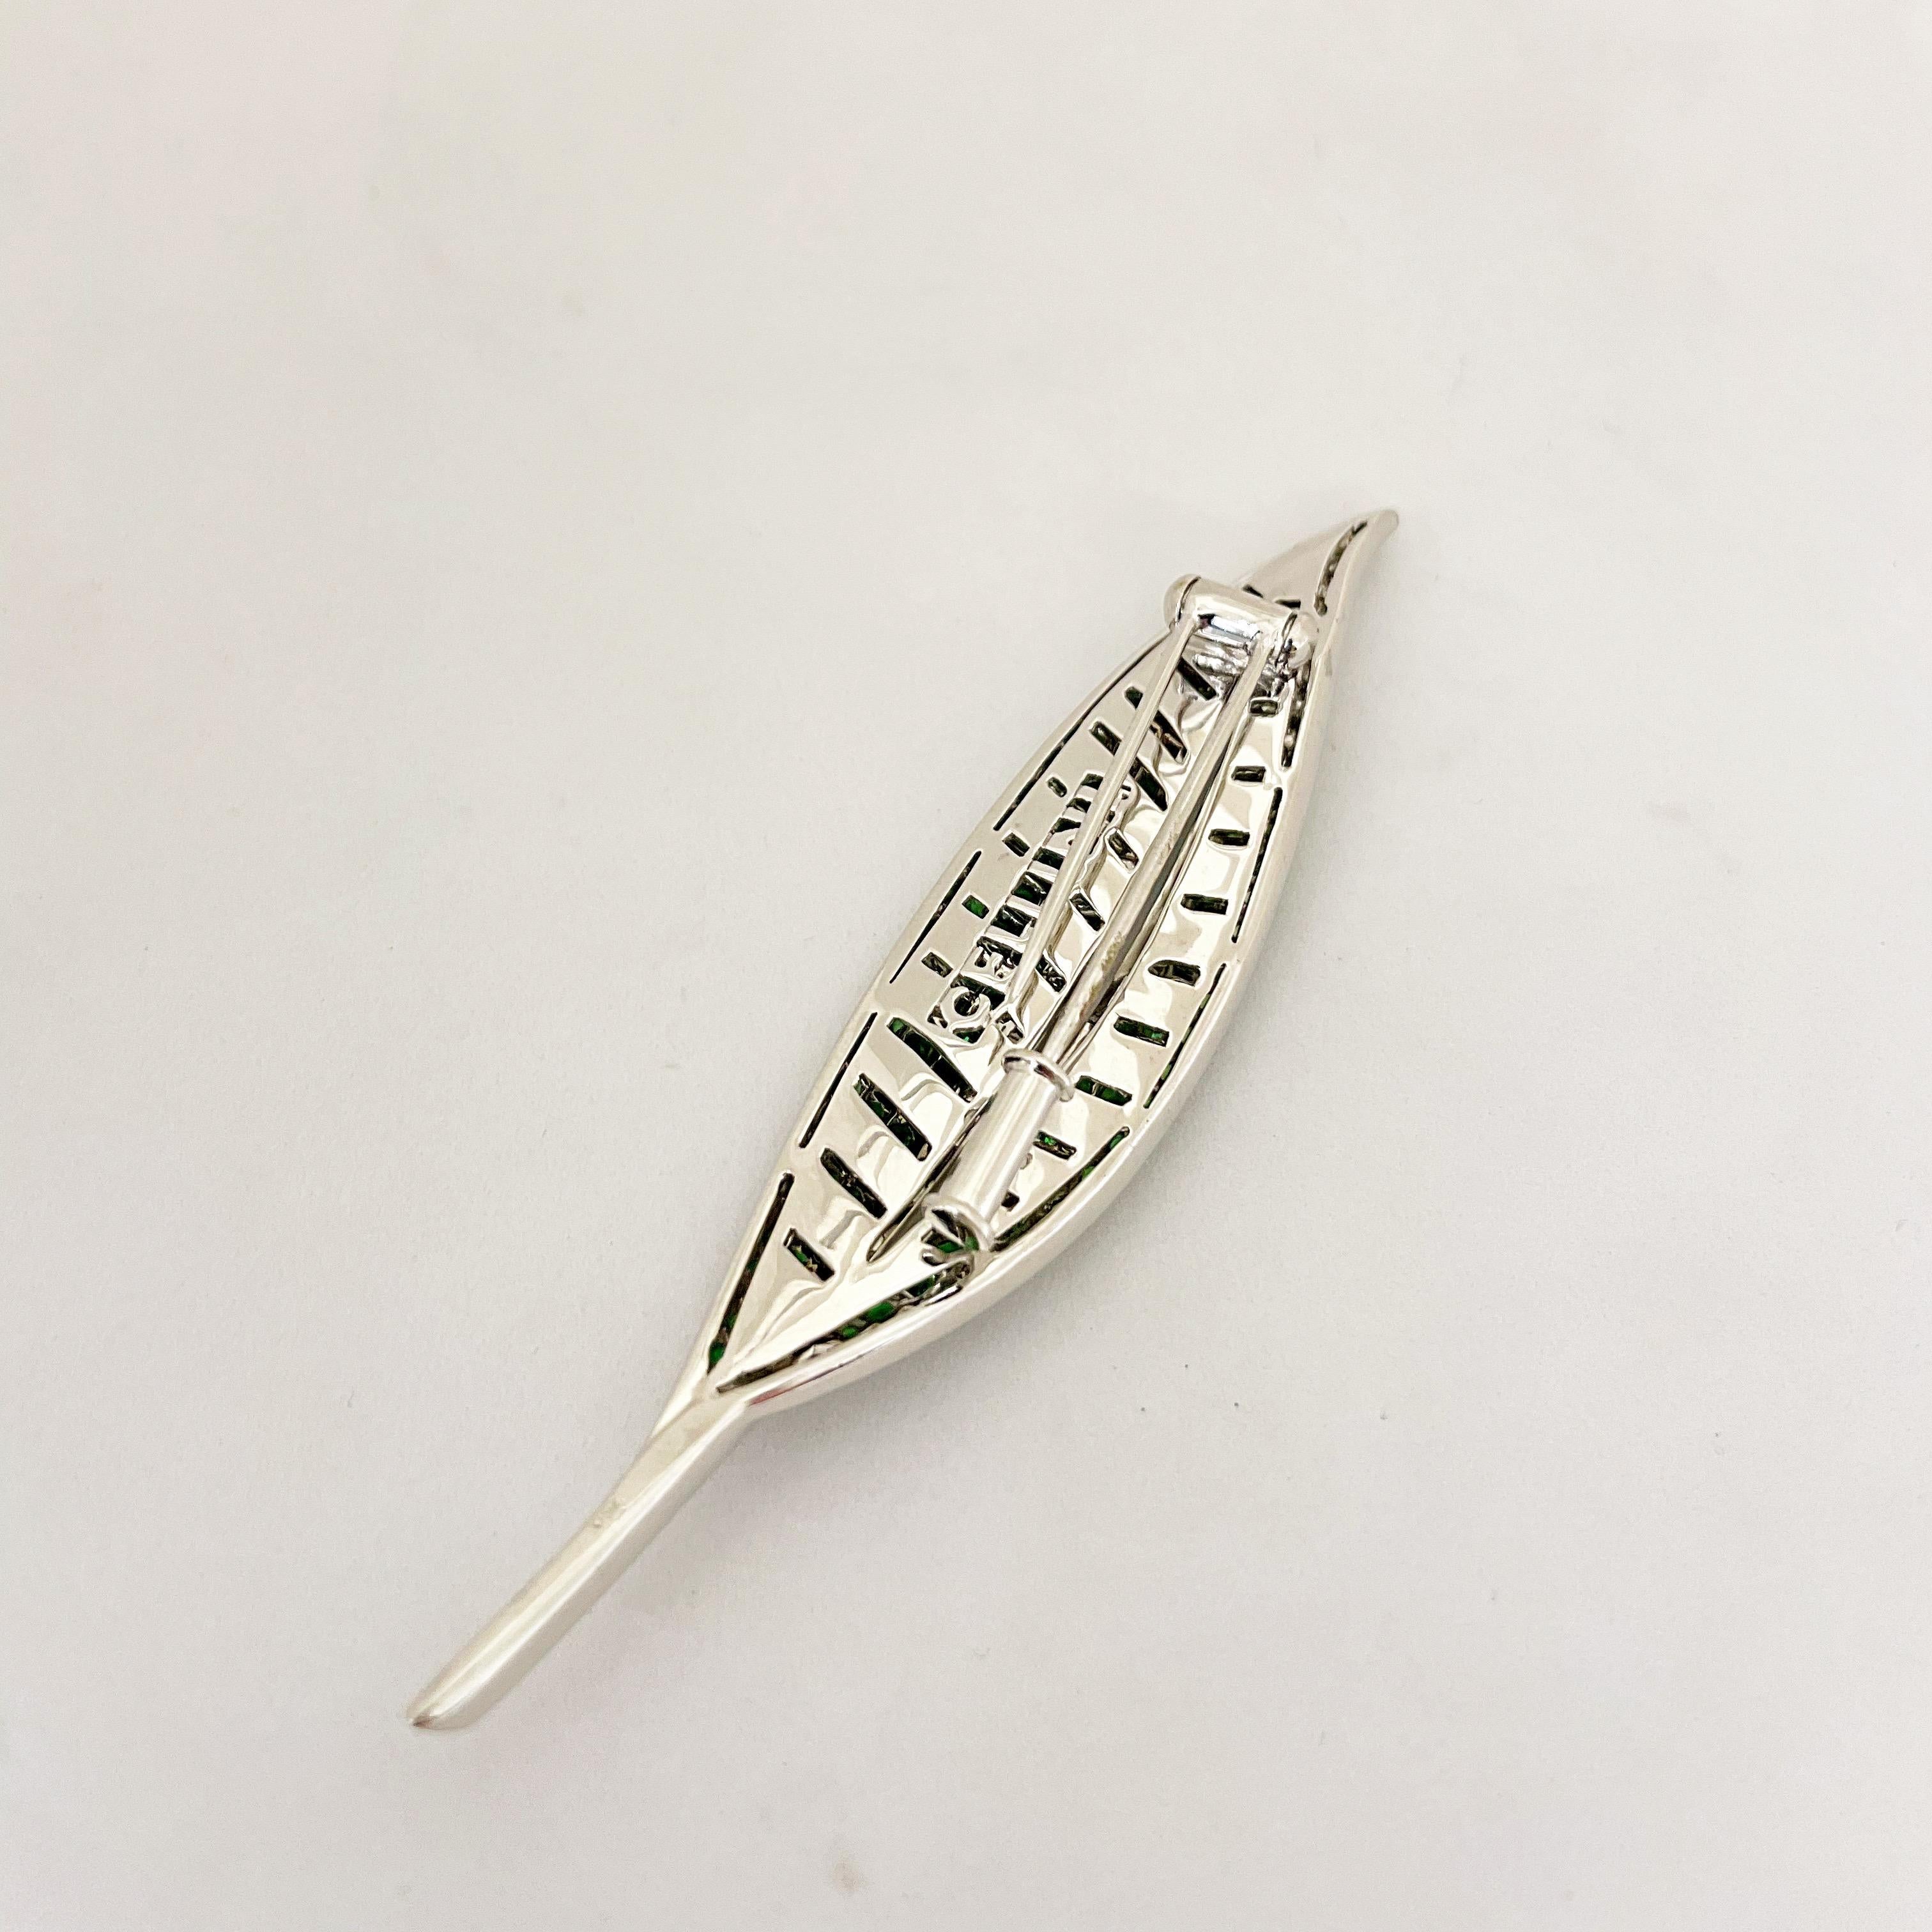 Cellini Jewelers NYC beautiful leaf brooch. This slender 18 karat white gold leaf brooch is beautifully set with ombre round tsavorite stones. The stem is set with round brilliant diamonds. The leaf measures 3.50